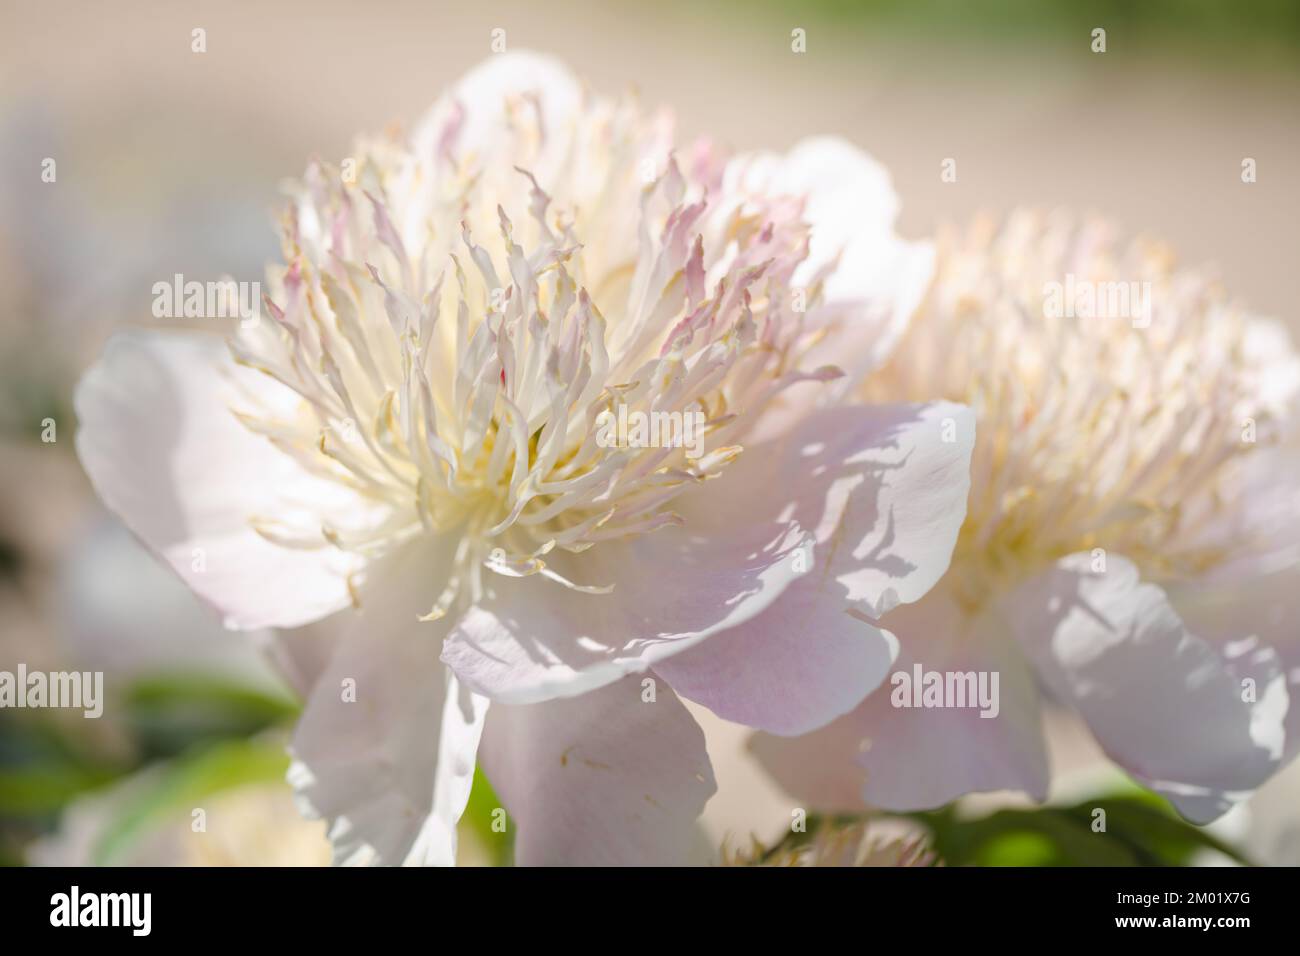 Closeup view of peony flowers in a garden Stock Photo